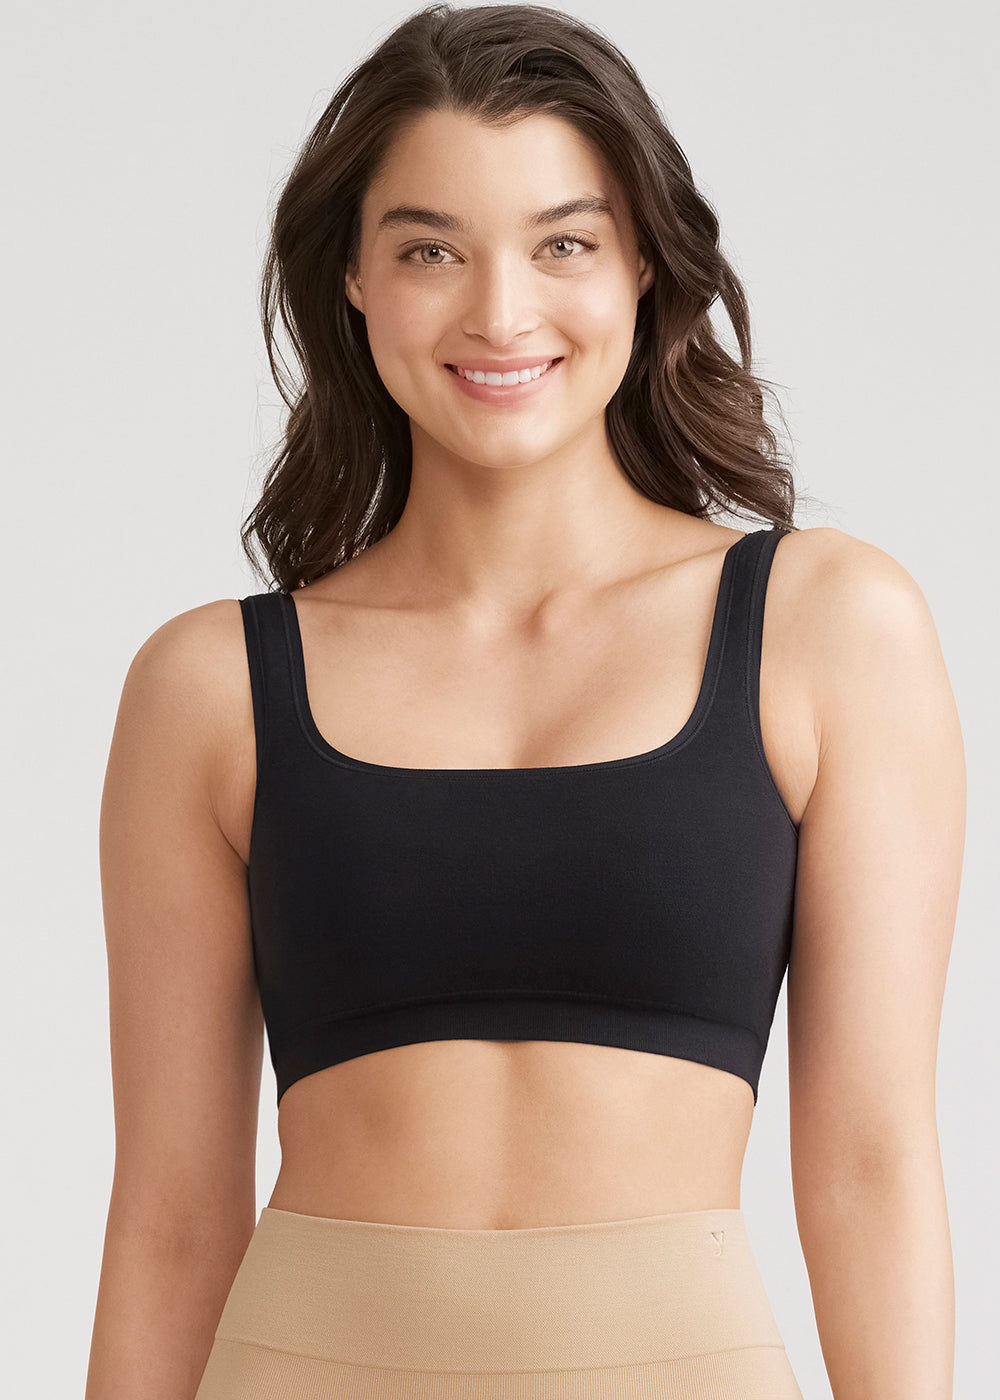 Yummie Women's Convertible Scoop Neck Bralette, Black, S/M at   Women's Clothing store